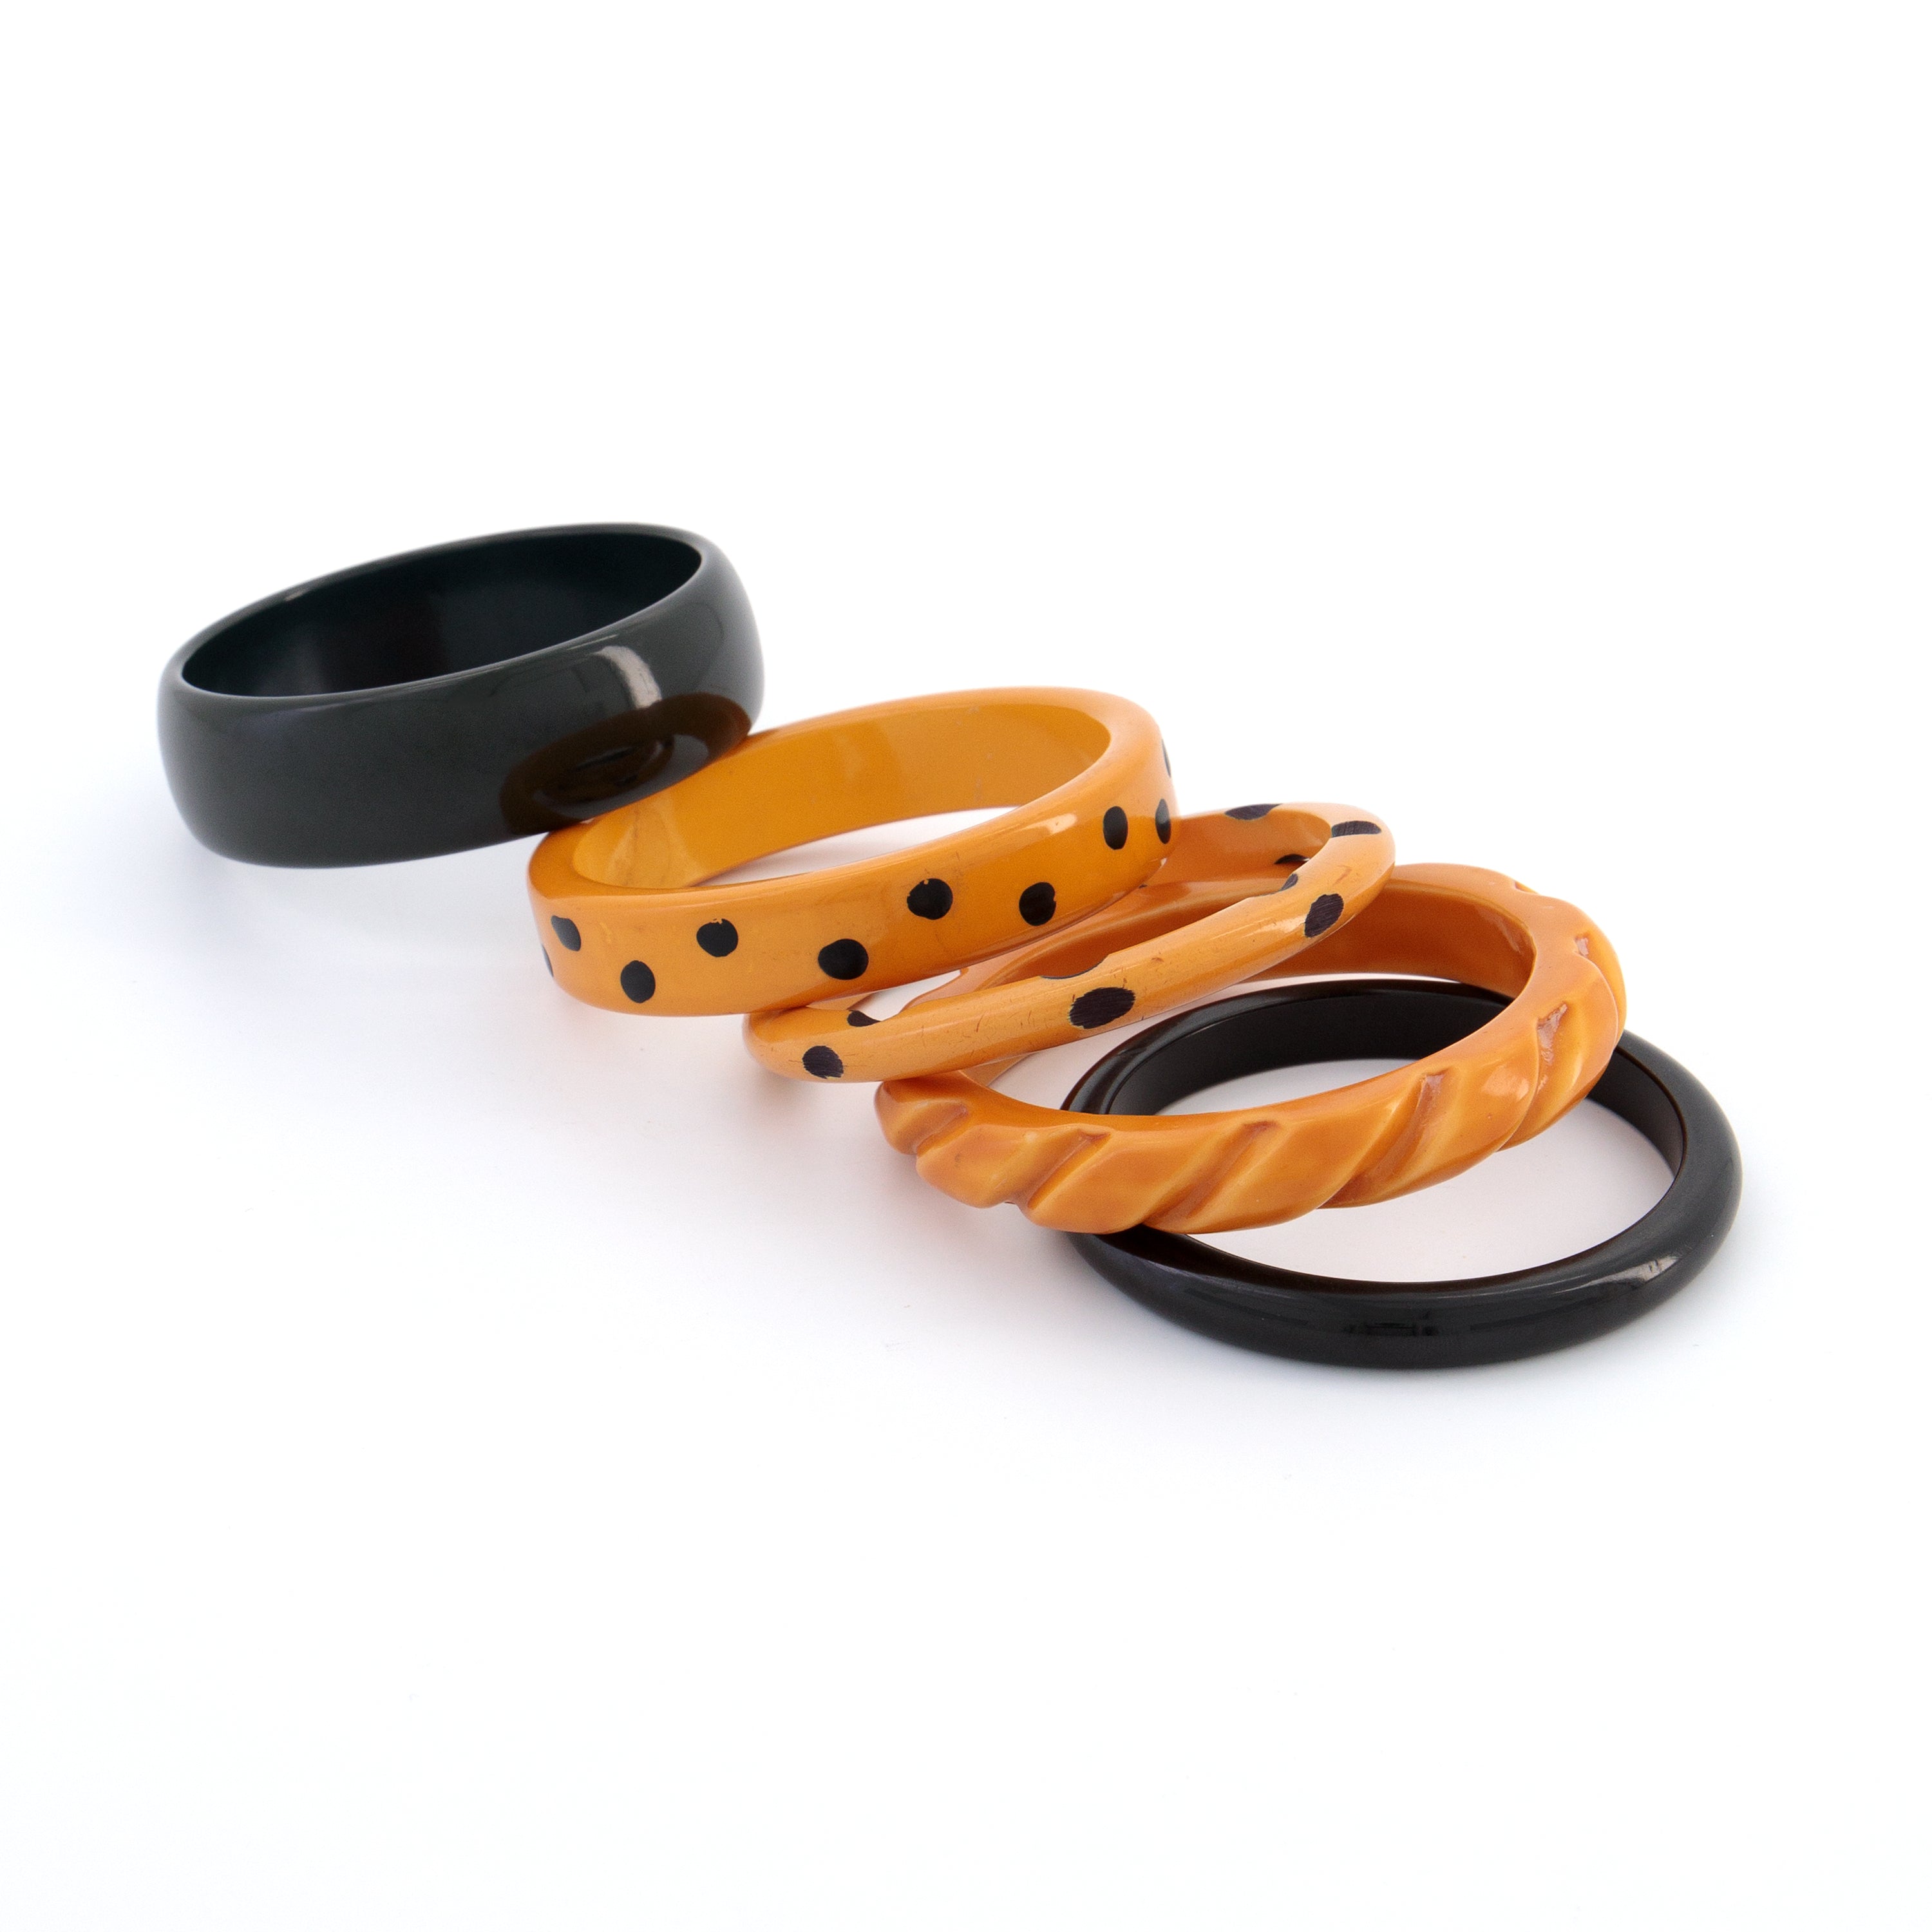 Five Bakelite bangles laid out on a white surface